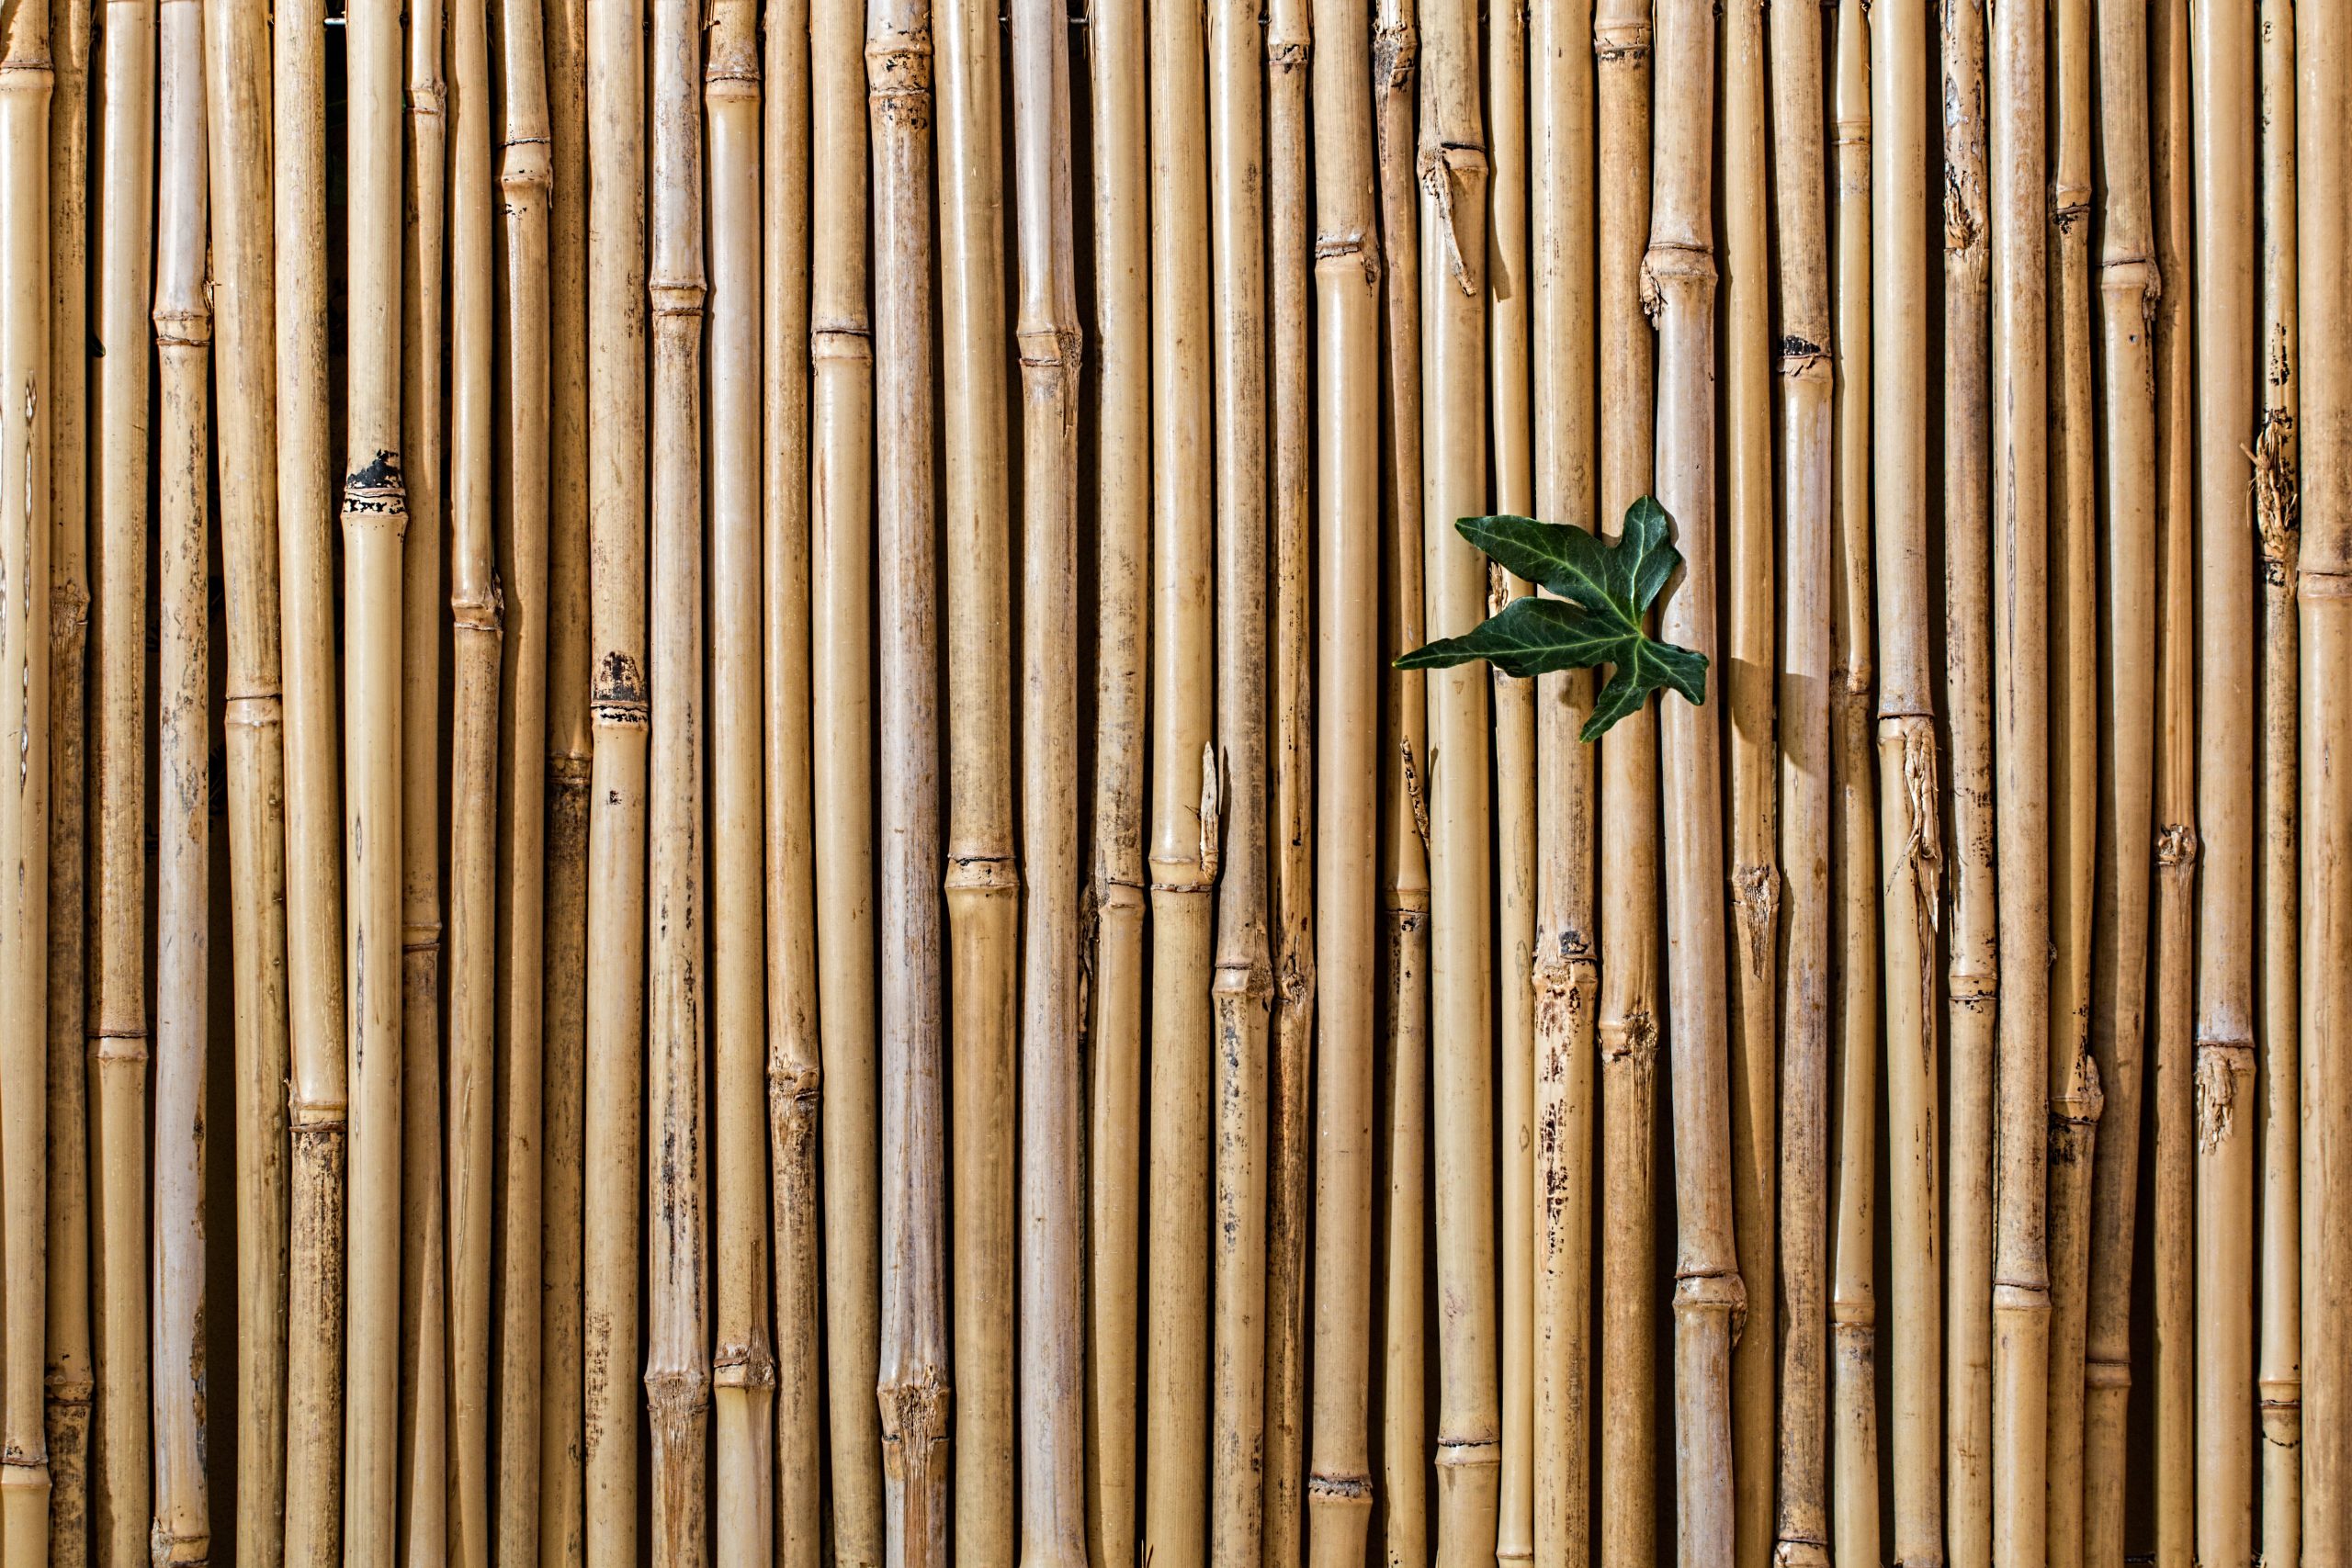 A picture of a plant that sprouted through a bamboo fence and thrived.